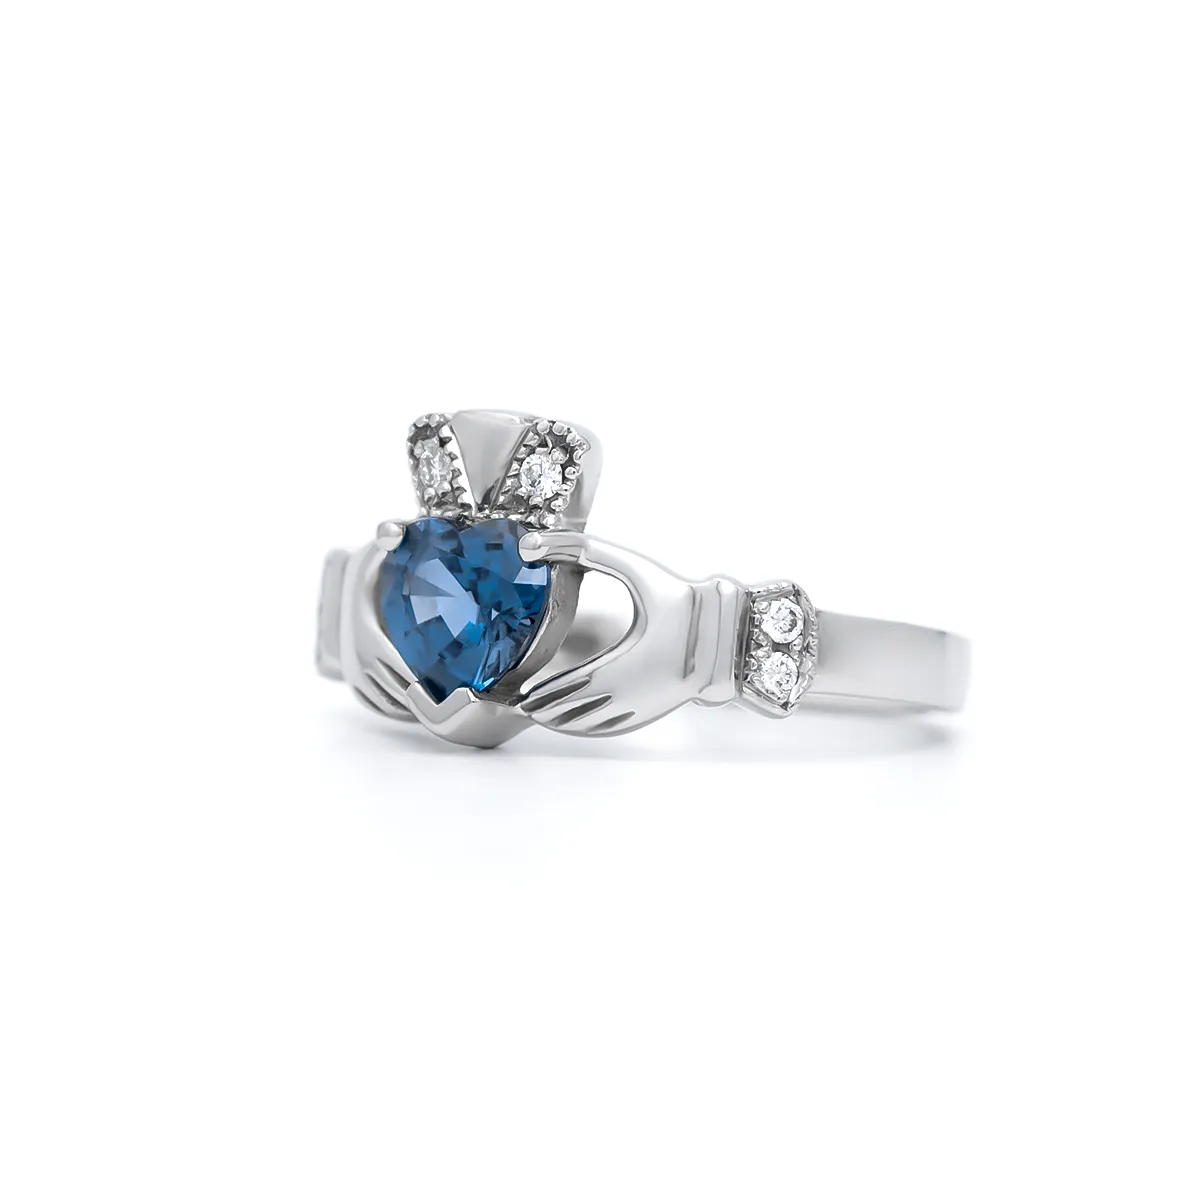 IJCR0035 White Gold Claddagh Ring With Sapphire 2